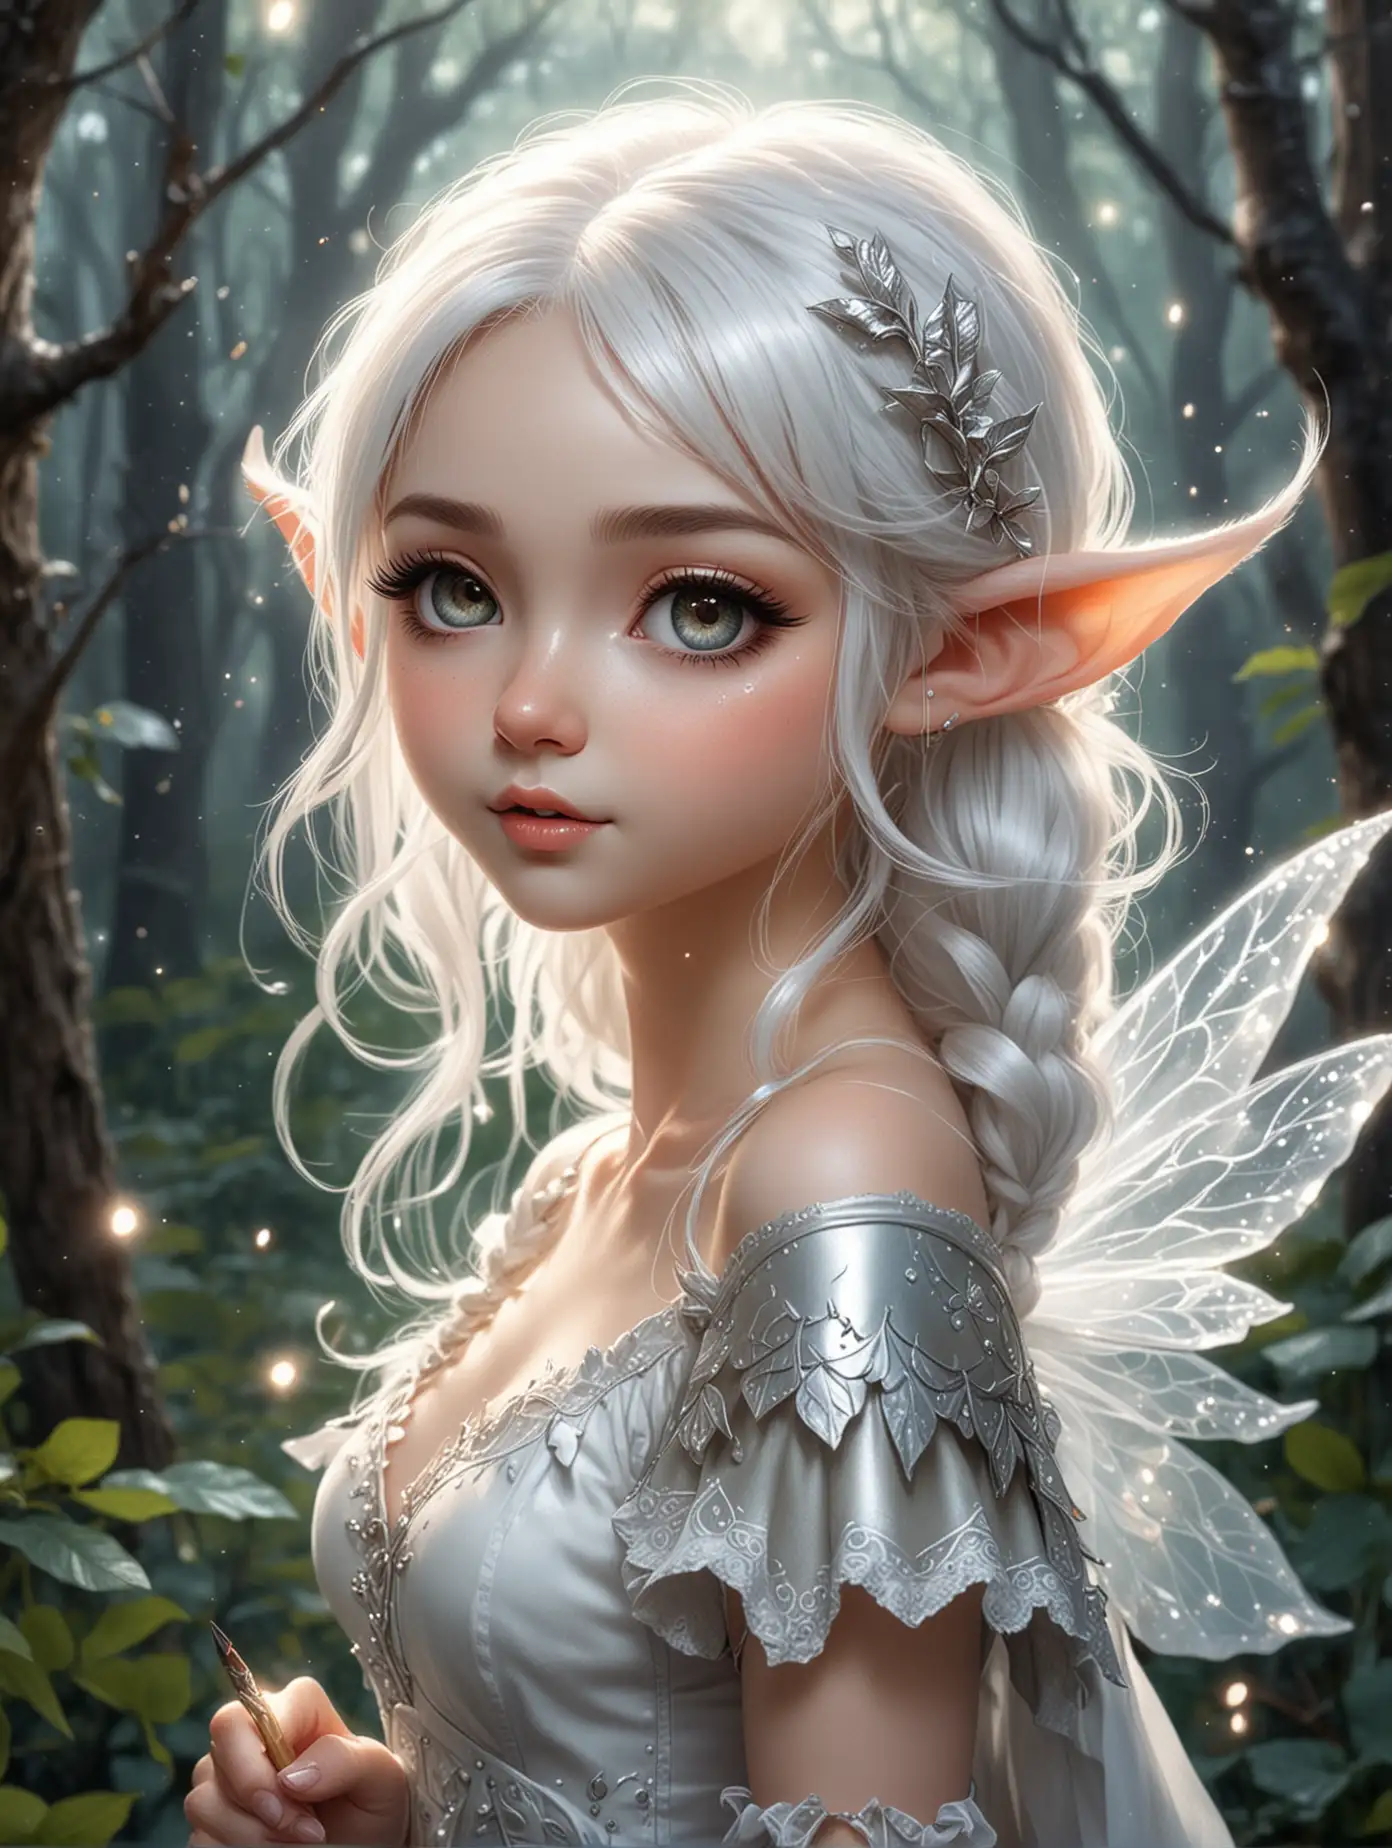 pencil drawn illustration Realistic portrait illustration of a beautiful elf fairy chibi girl, she has white hair, fantasy outfit, big pointy ears, shimmering make up, she's in the magical forest, the background is white with sparks